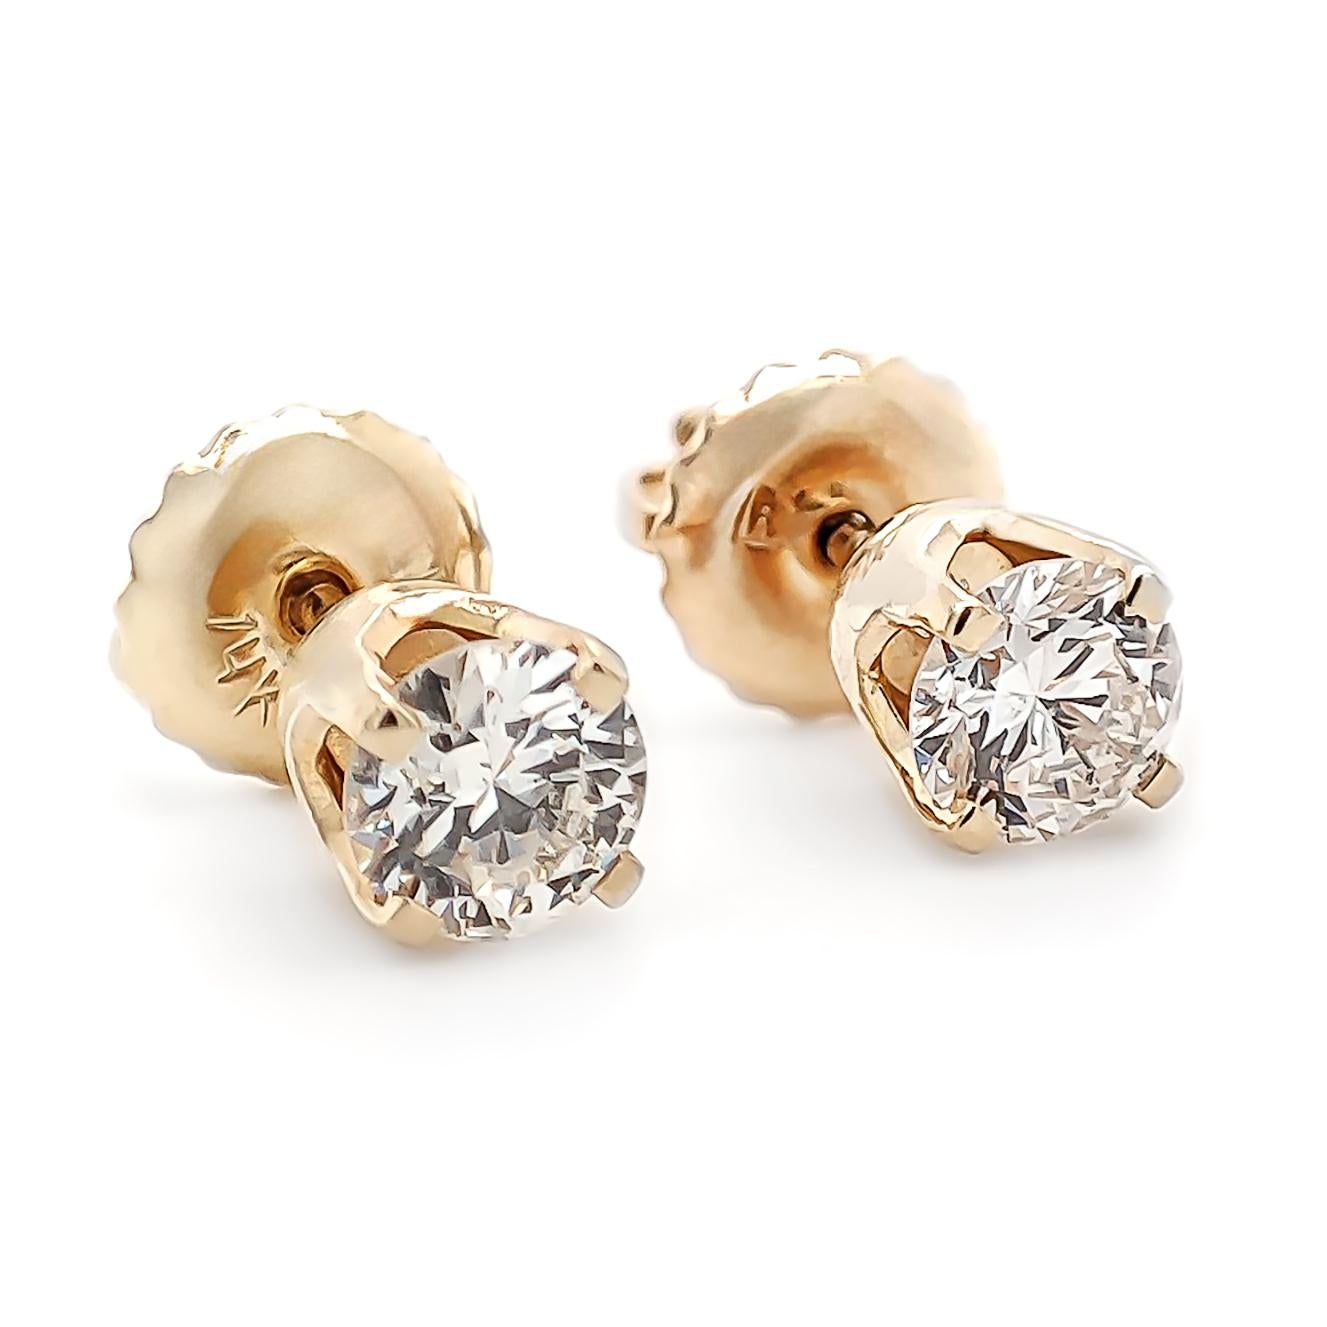 FOR U.S. BUYERS NO VAT 

If you want to add color to any style you choose, these 14kt diamond stud earrings weighing 0.78 grams are definitely for you. These gorgeous earrings feature two round brilliant cuts set in 14kt Yellow gold totaling 0.50